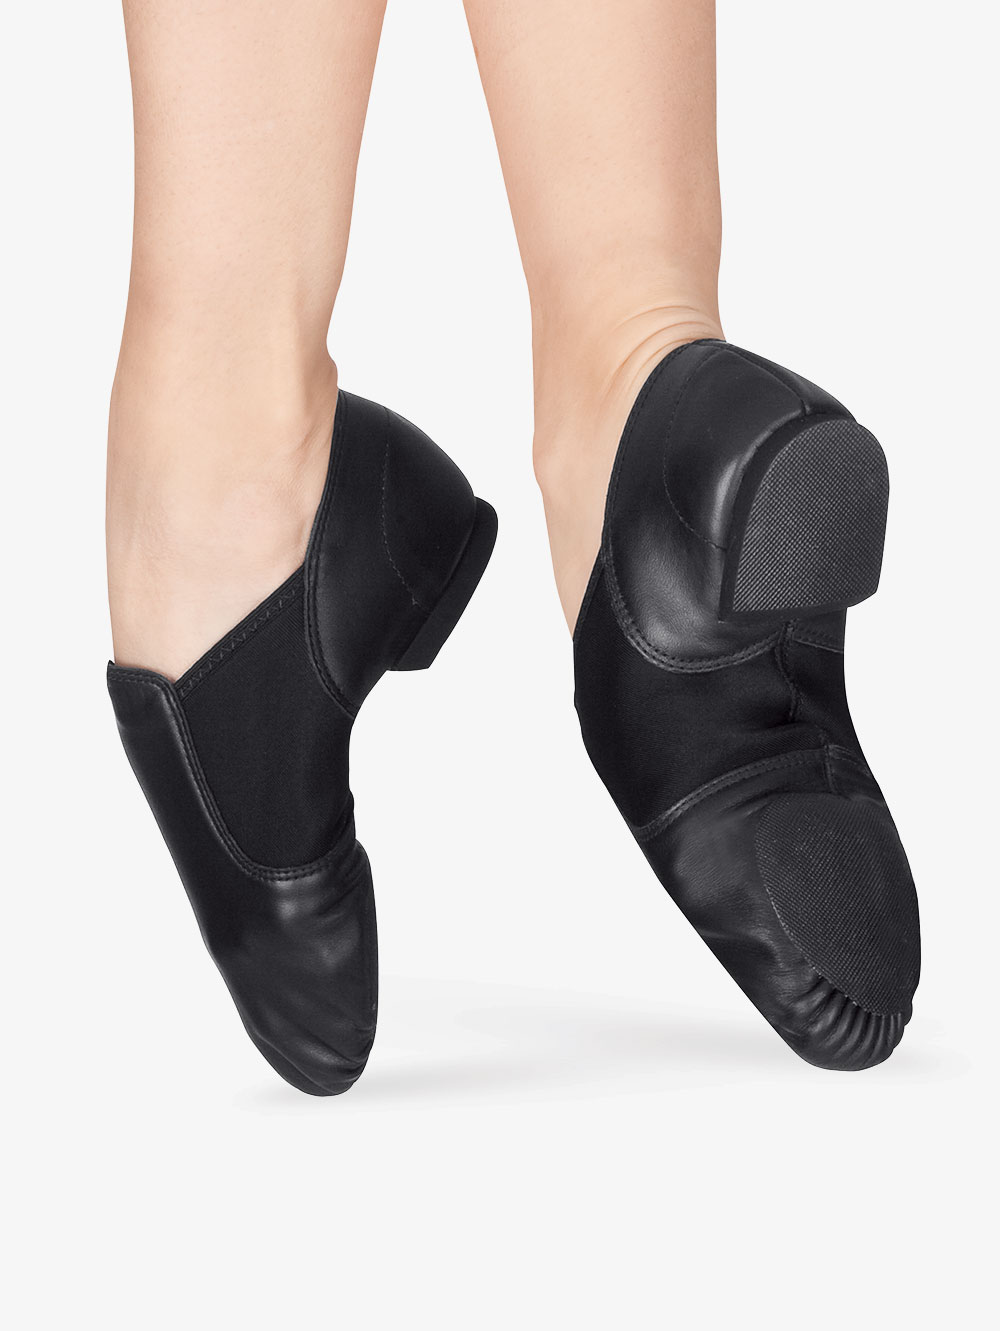 jazz shoes for wide feet